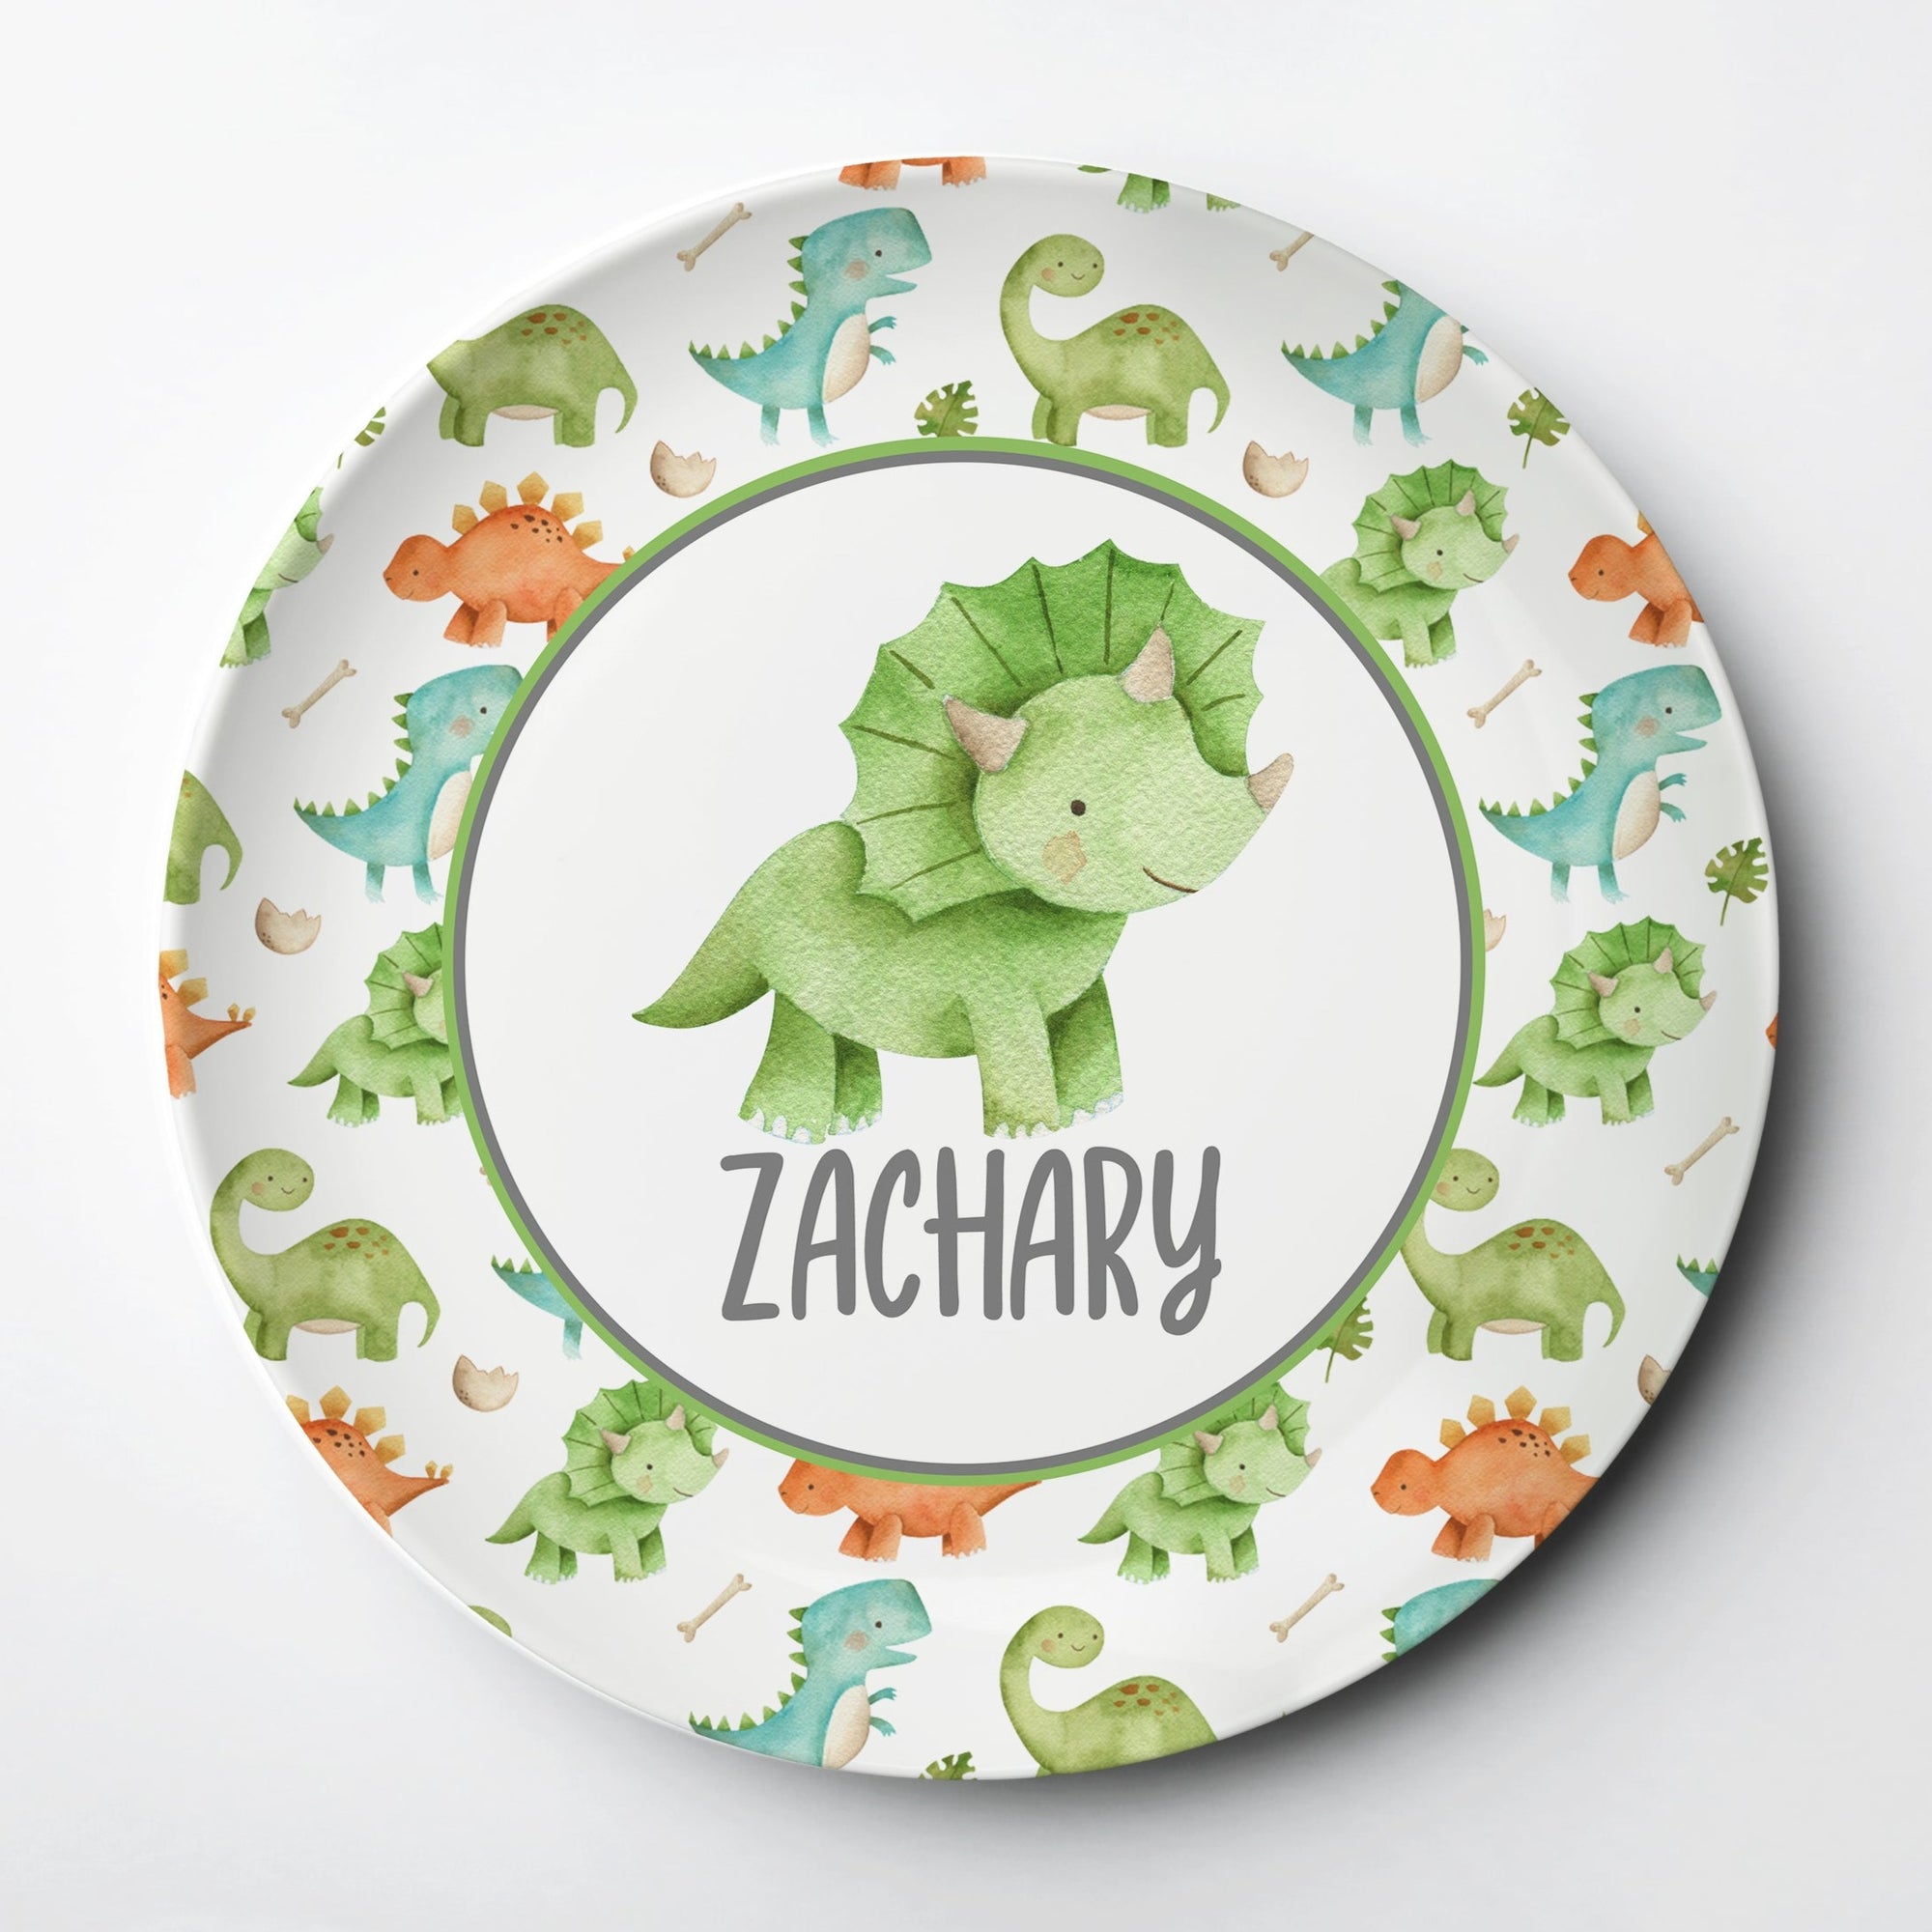 Dinosaur personalized kid plate Triceratops - 10" diameter, made from ThermoSāf® · Microwave, oven and dishwasher safe (any rack) · BPA, melamine and formaldehyde free · FDA food safe & made in the USA, Pipsy.com